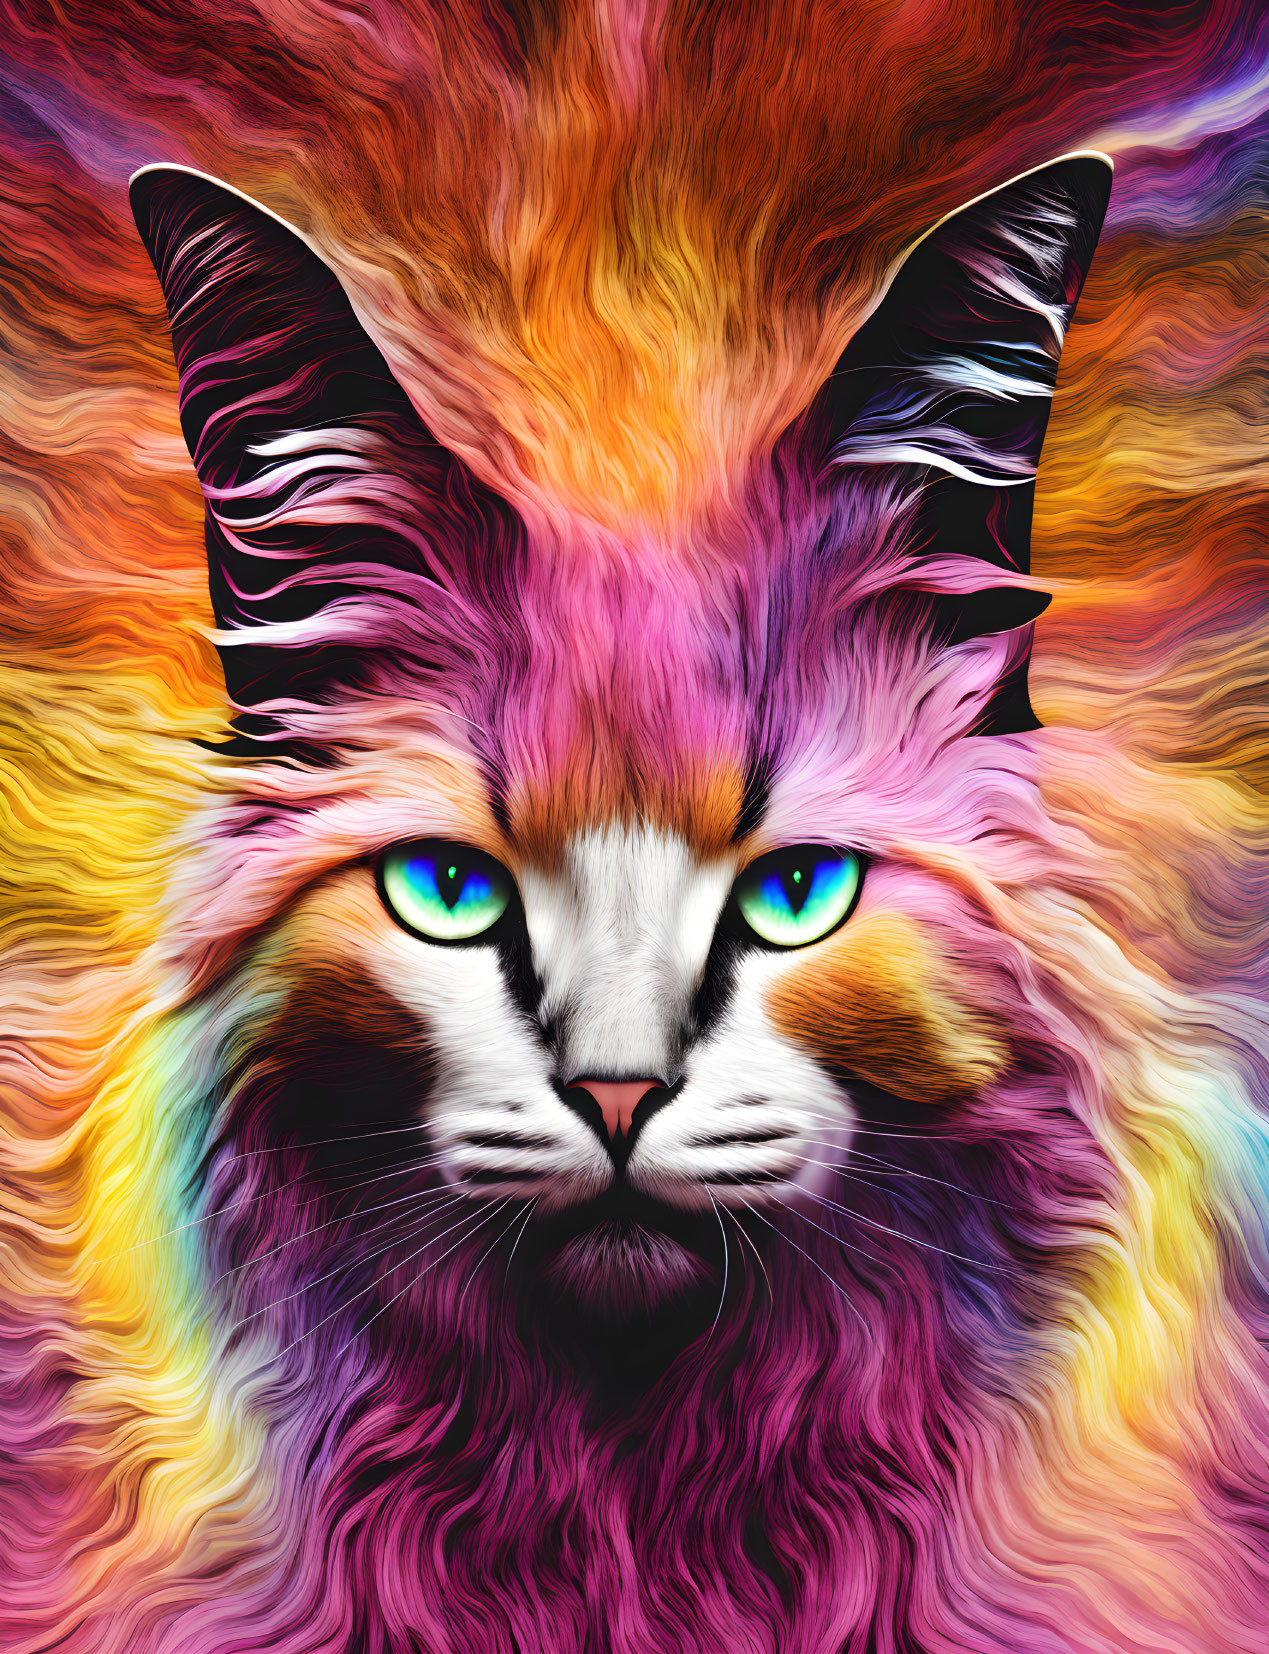 Colorful Digital Art: Cat with Blue Eyes & Flame-Like Fur